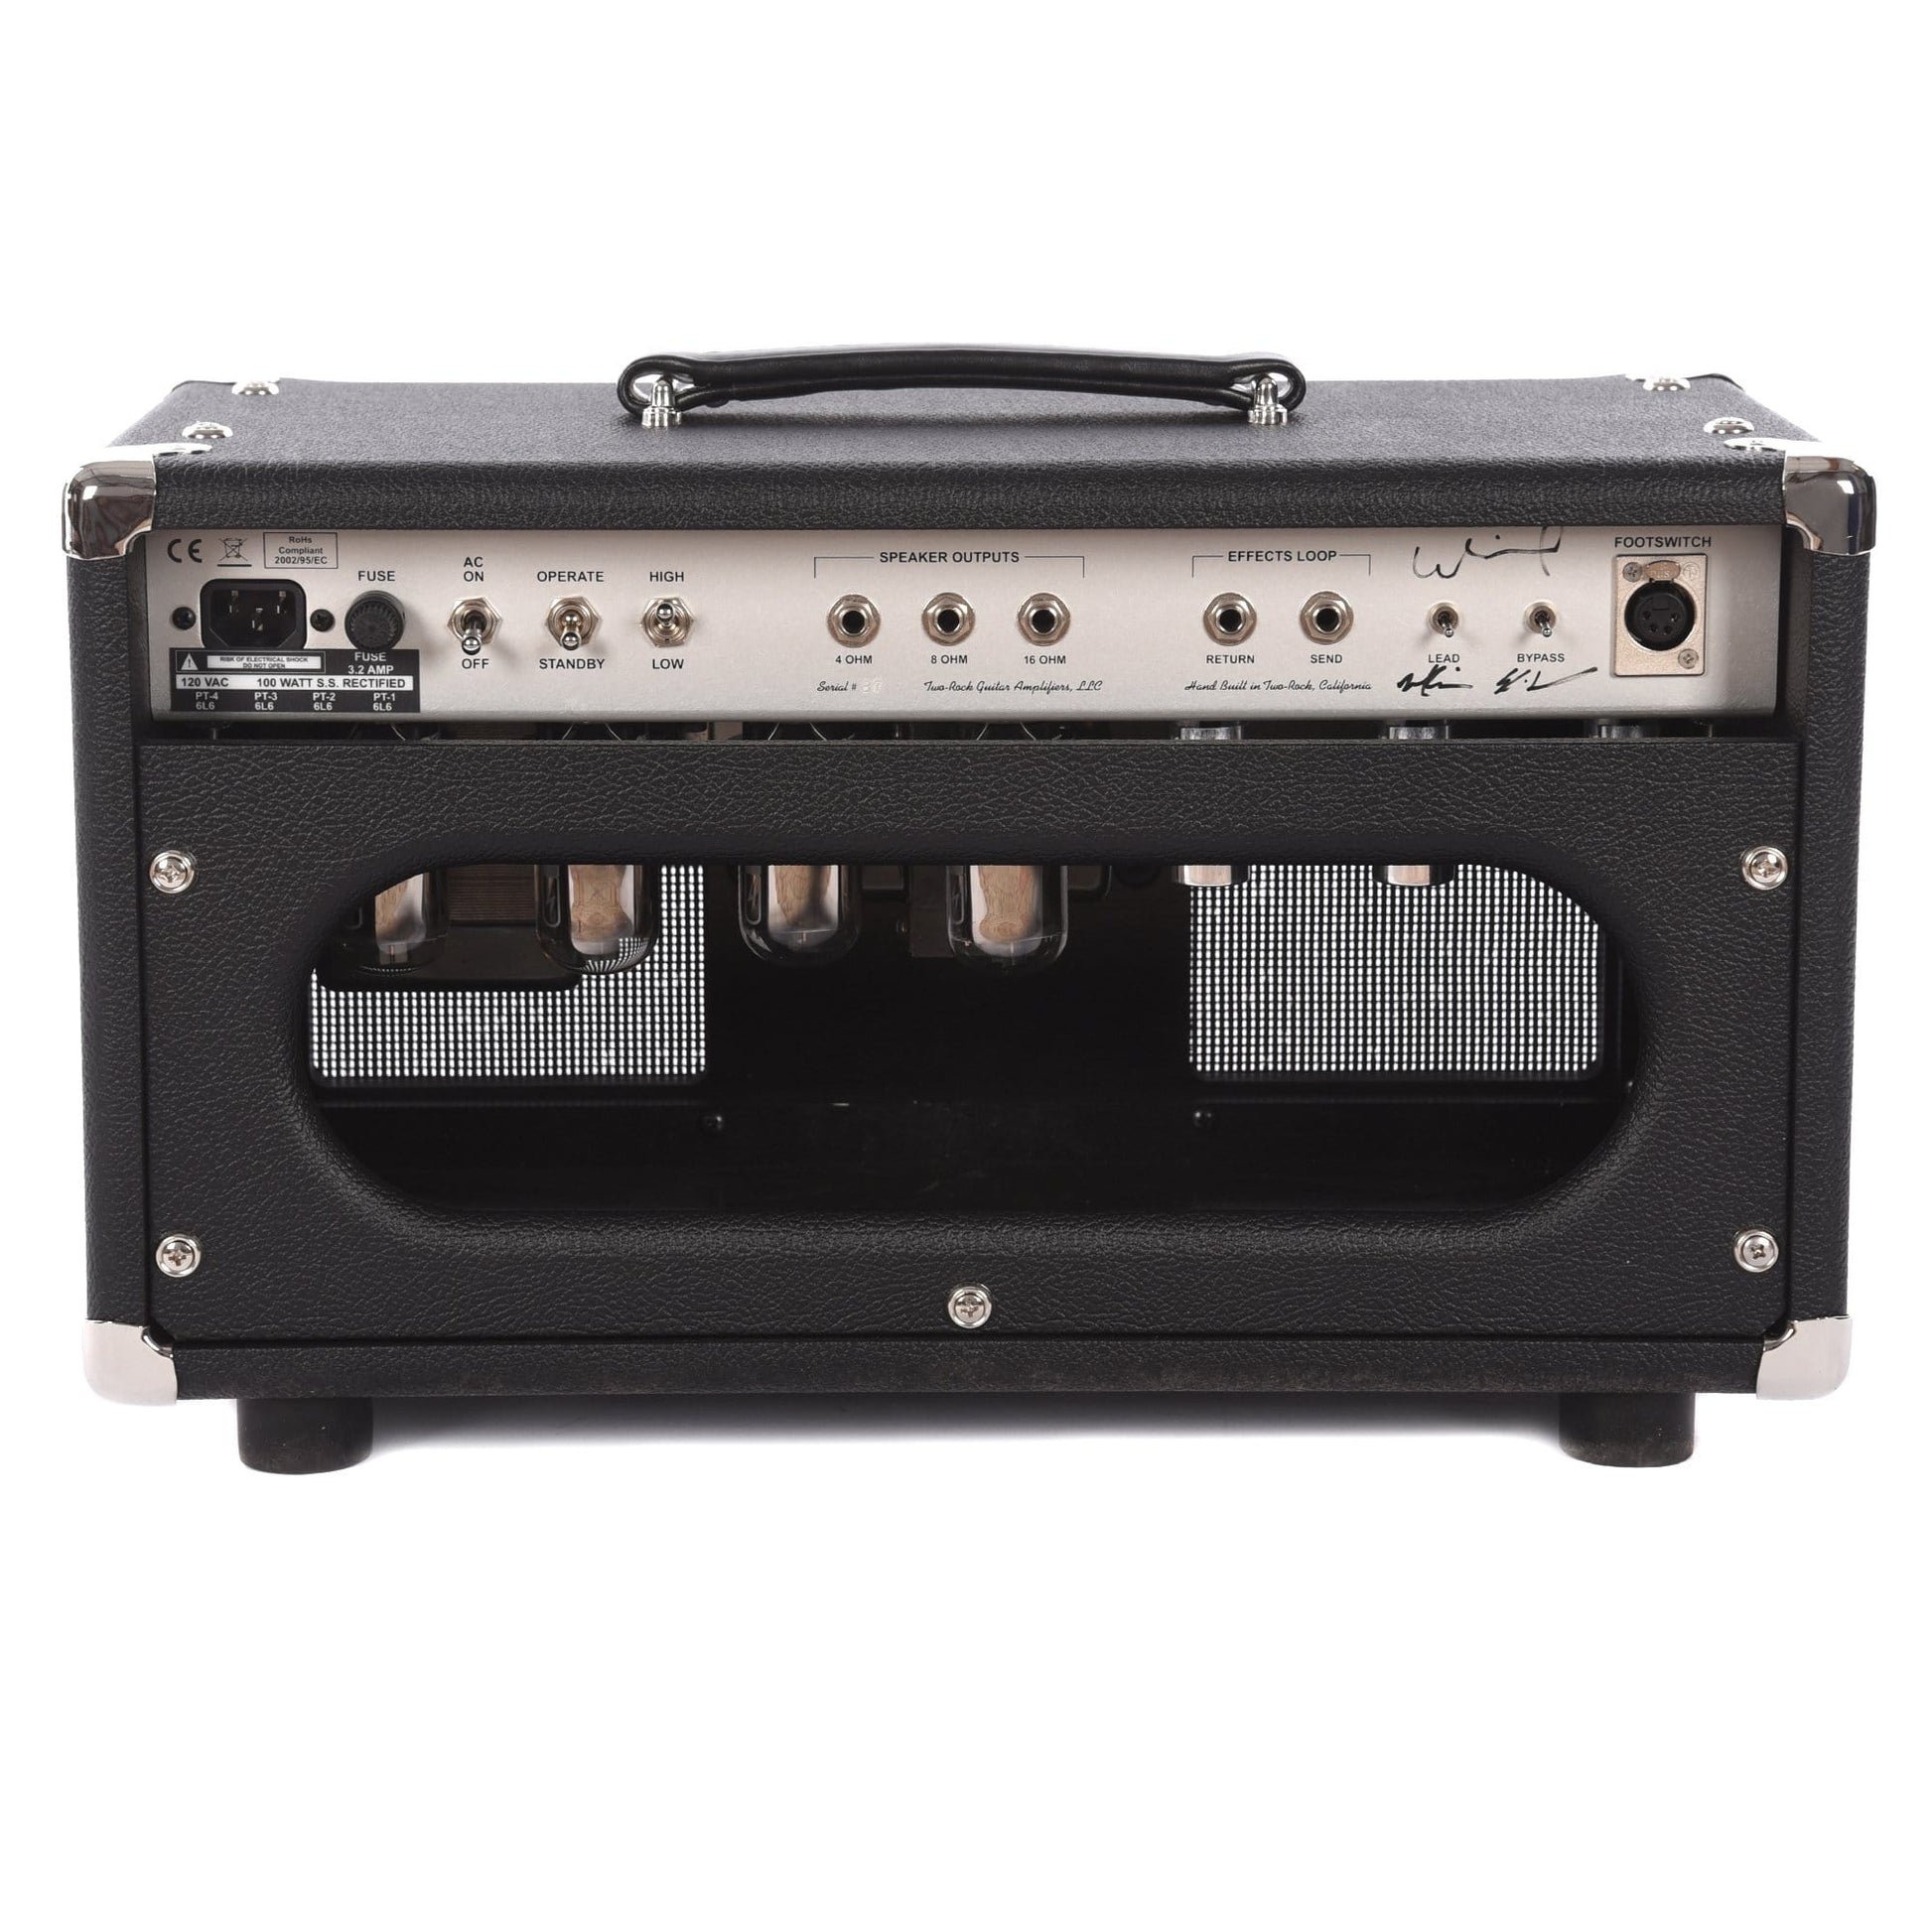 Two Rock TS1 100W Head Silver Anodized Chasis Black Bronco Tolex w/Silver Skirted Knobs Amps / Guitar Heads